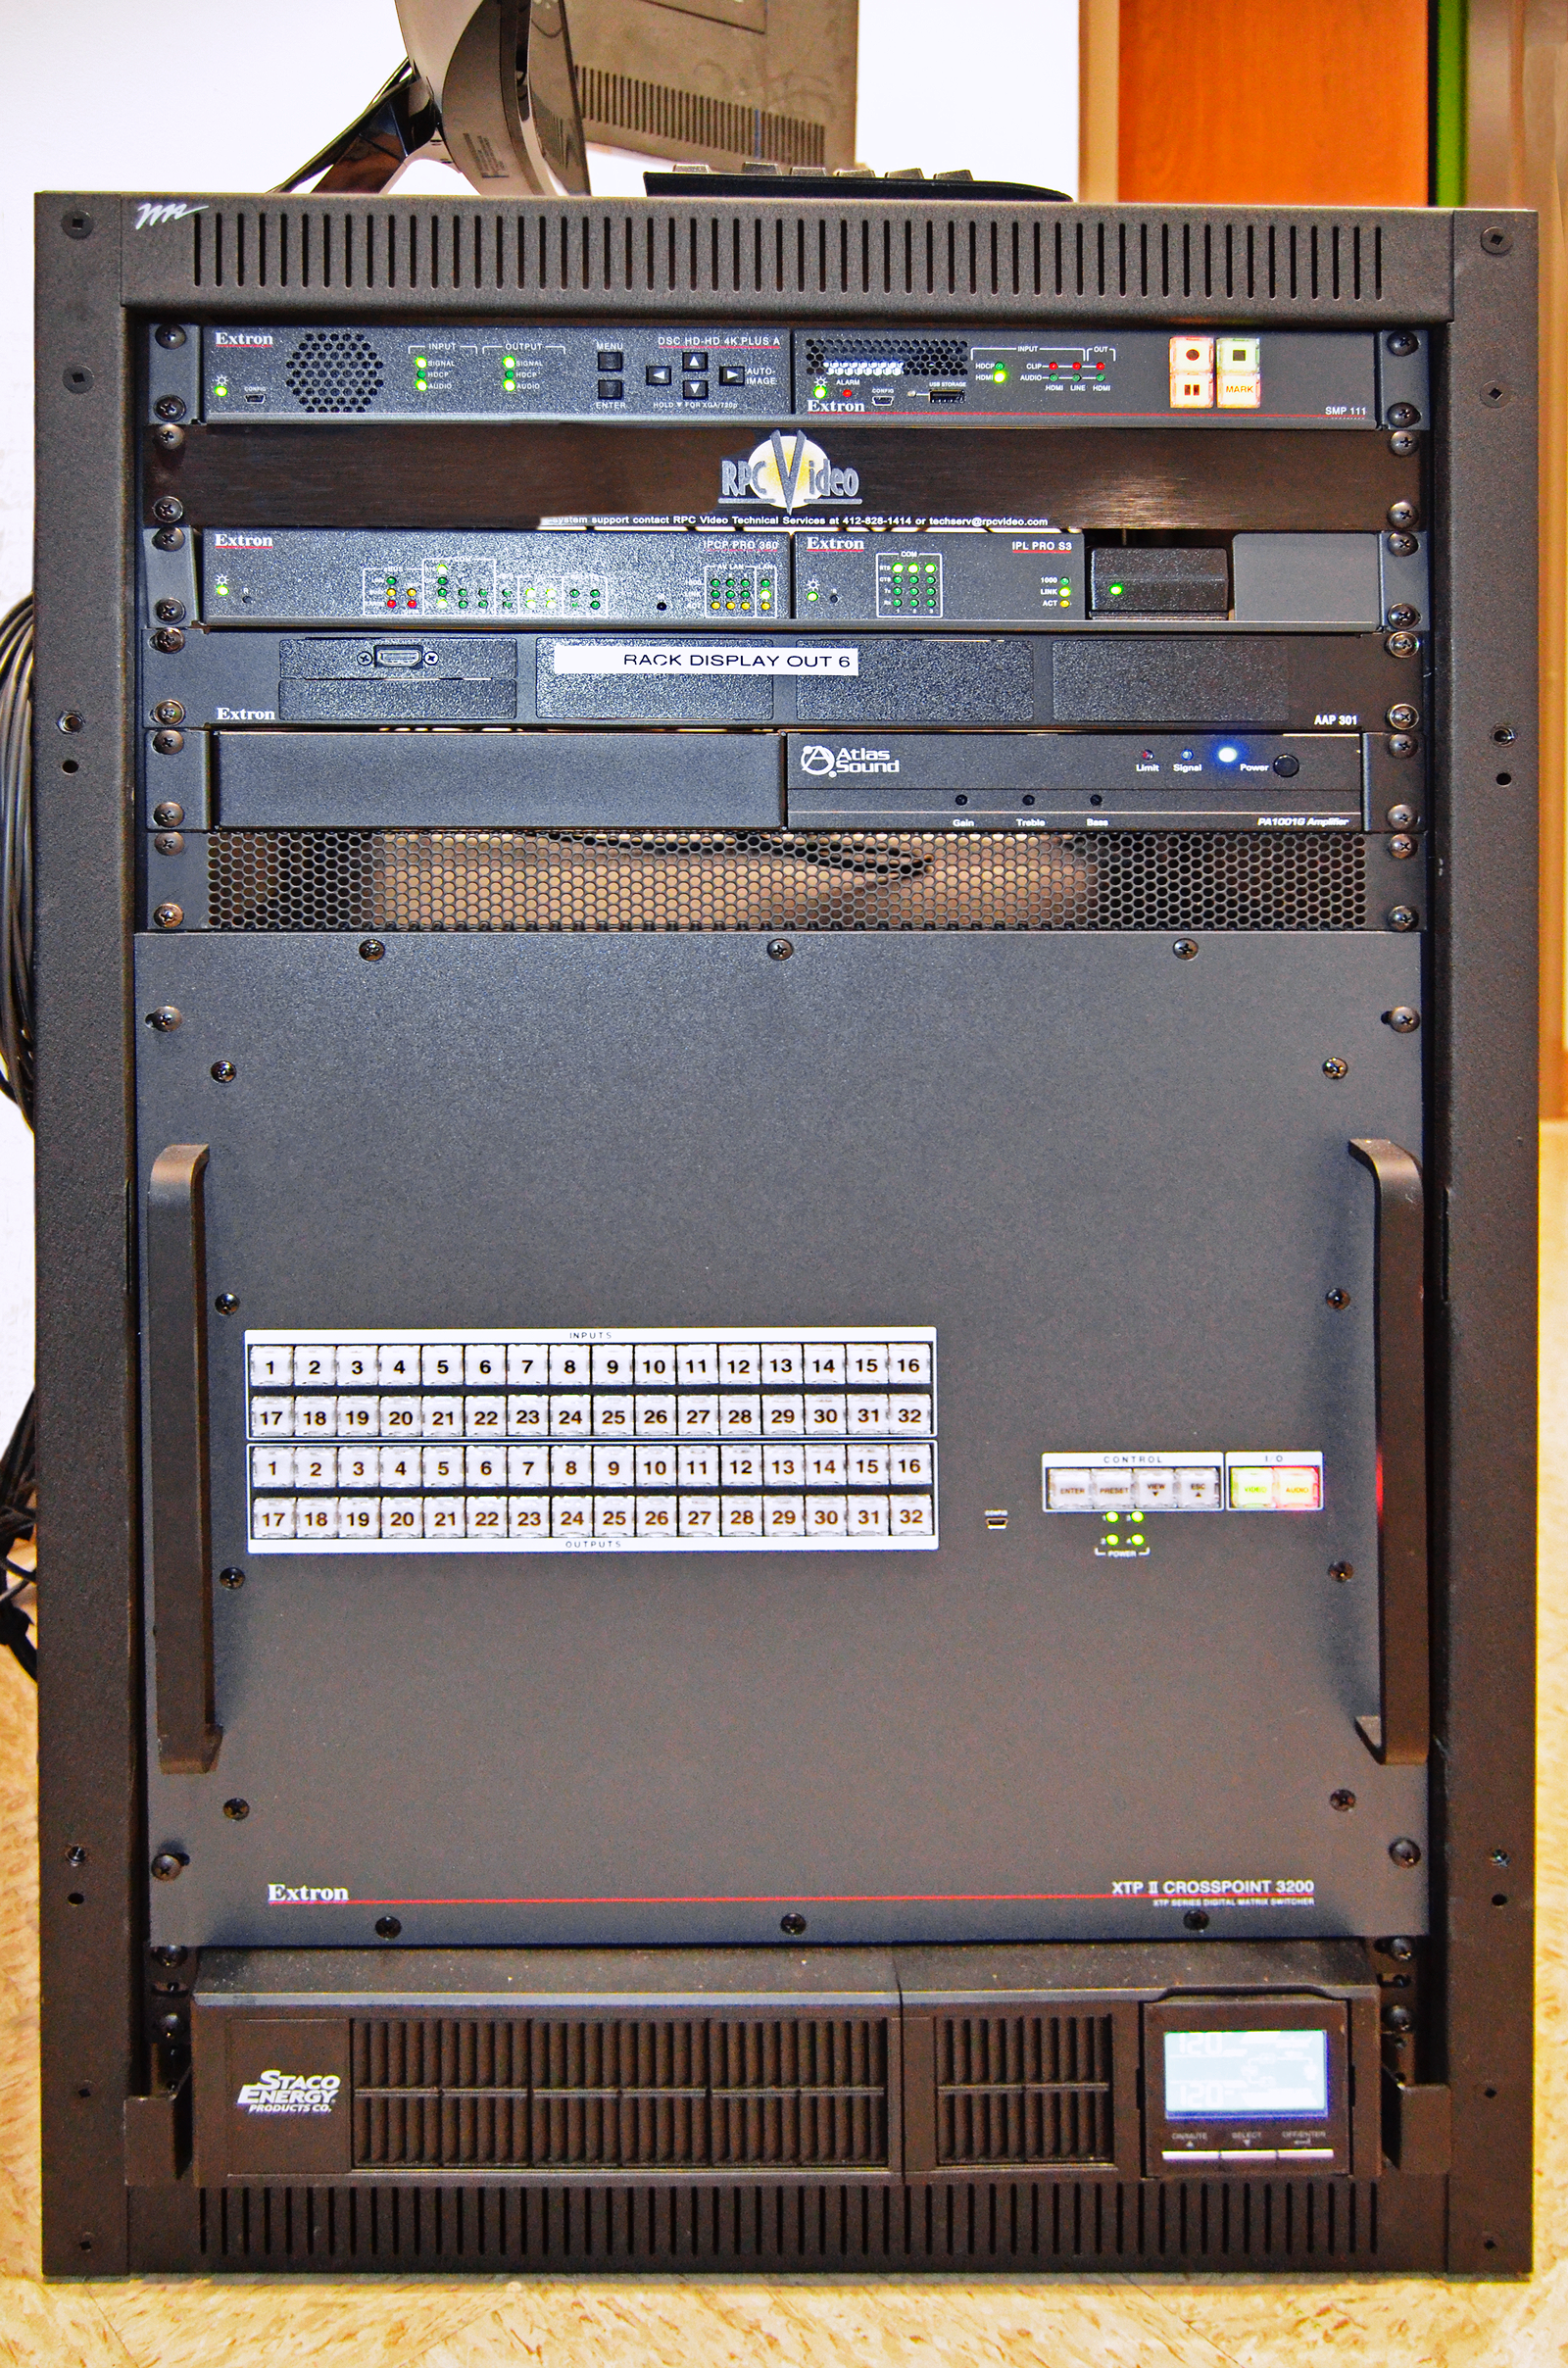 The XTP II CrossPoint 3200 matrix switcher and other system components are rack-mounted in the adjacent equipment room. This space is also used to store spare gaming gear and provides a small work space with a connected monitor.